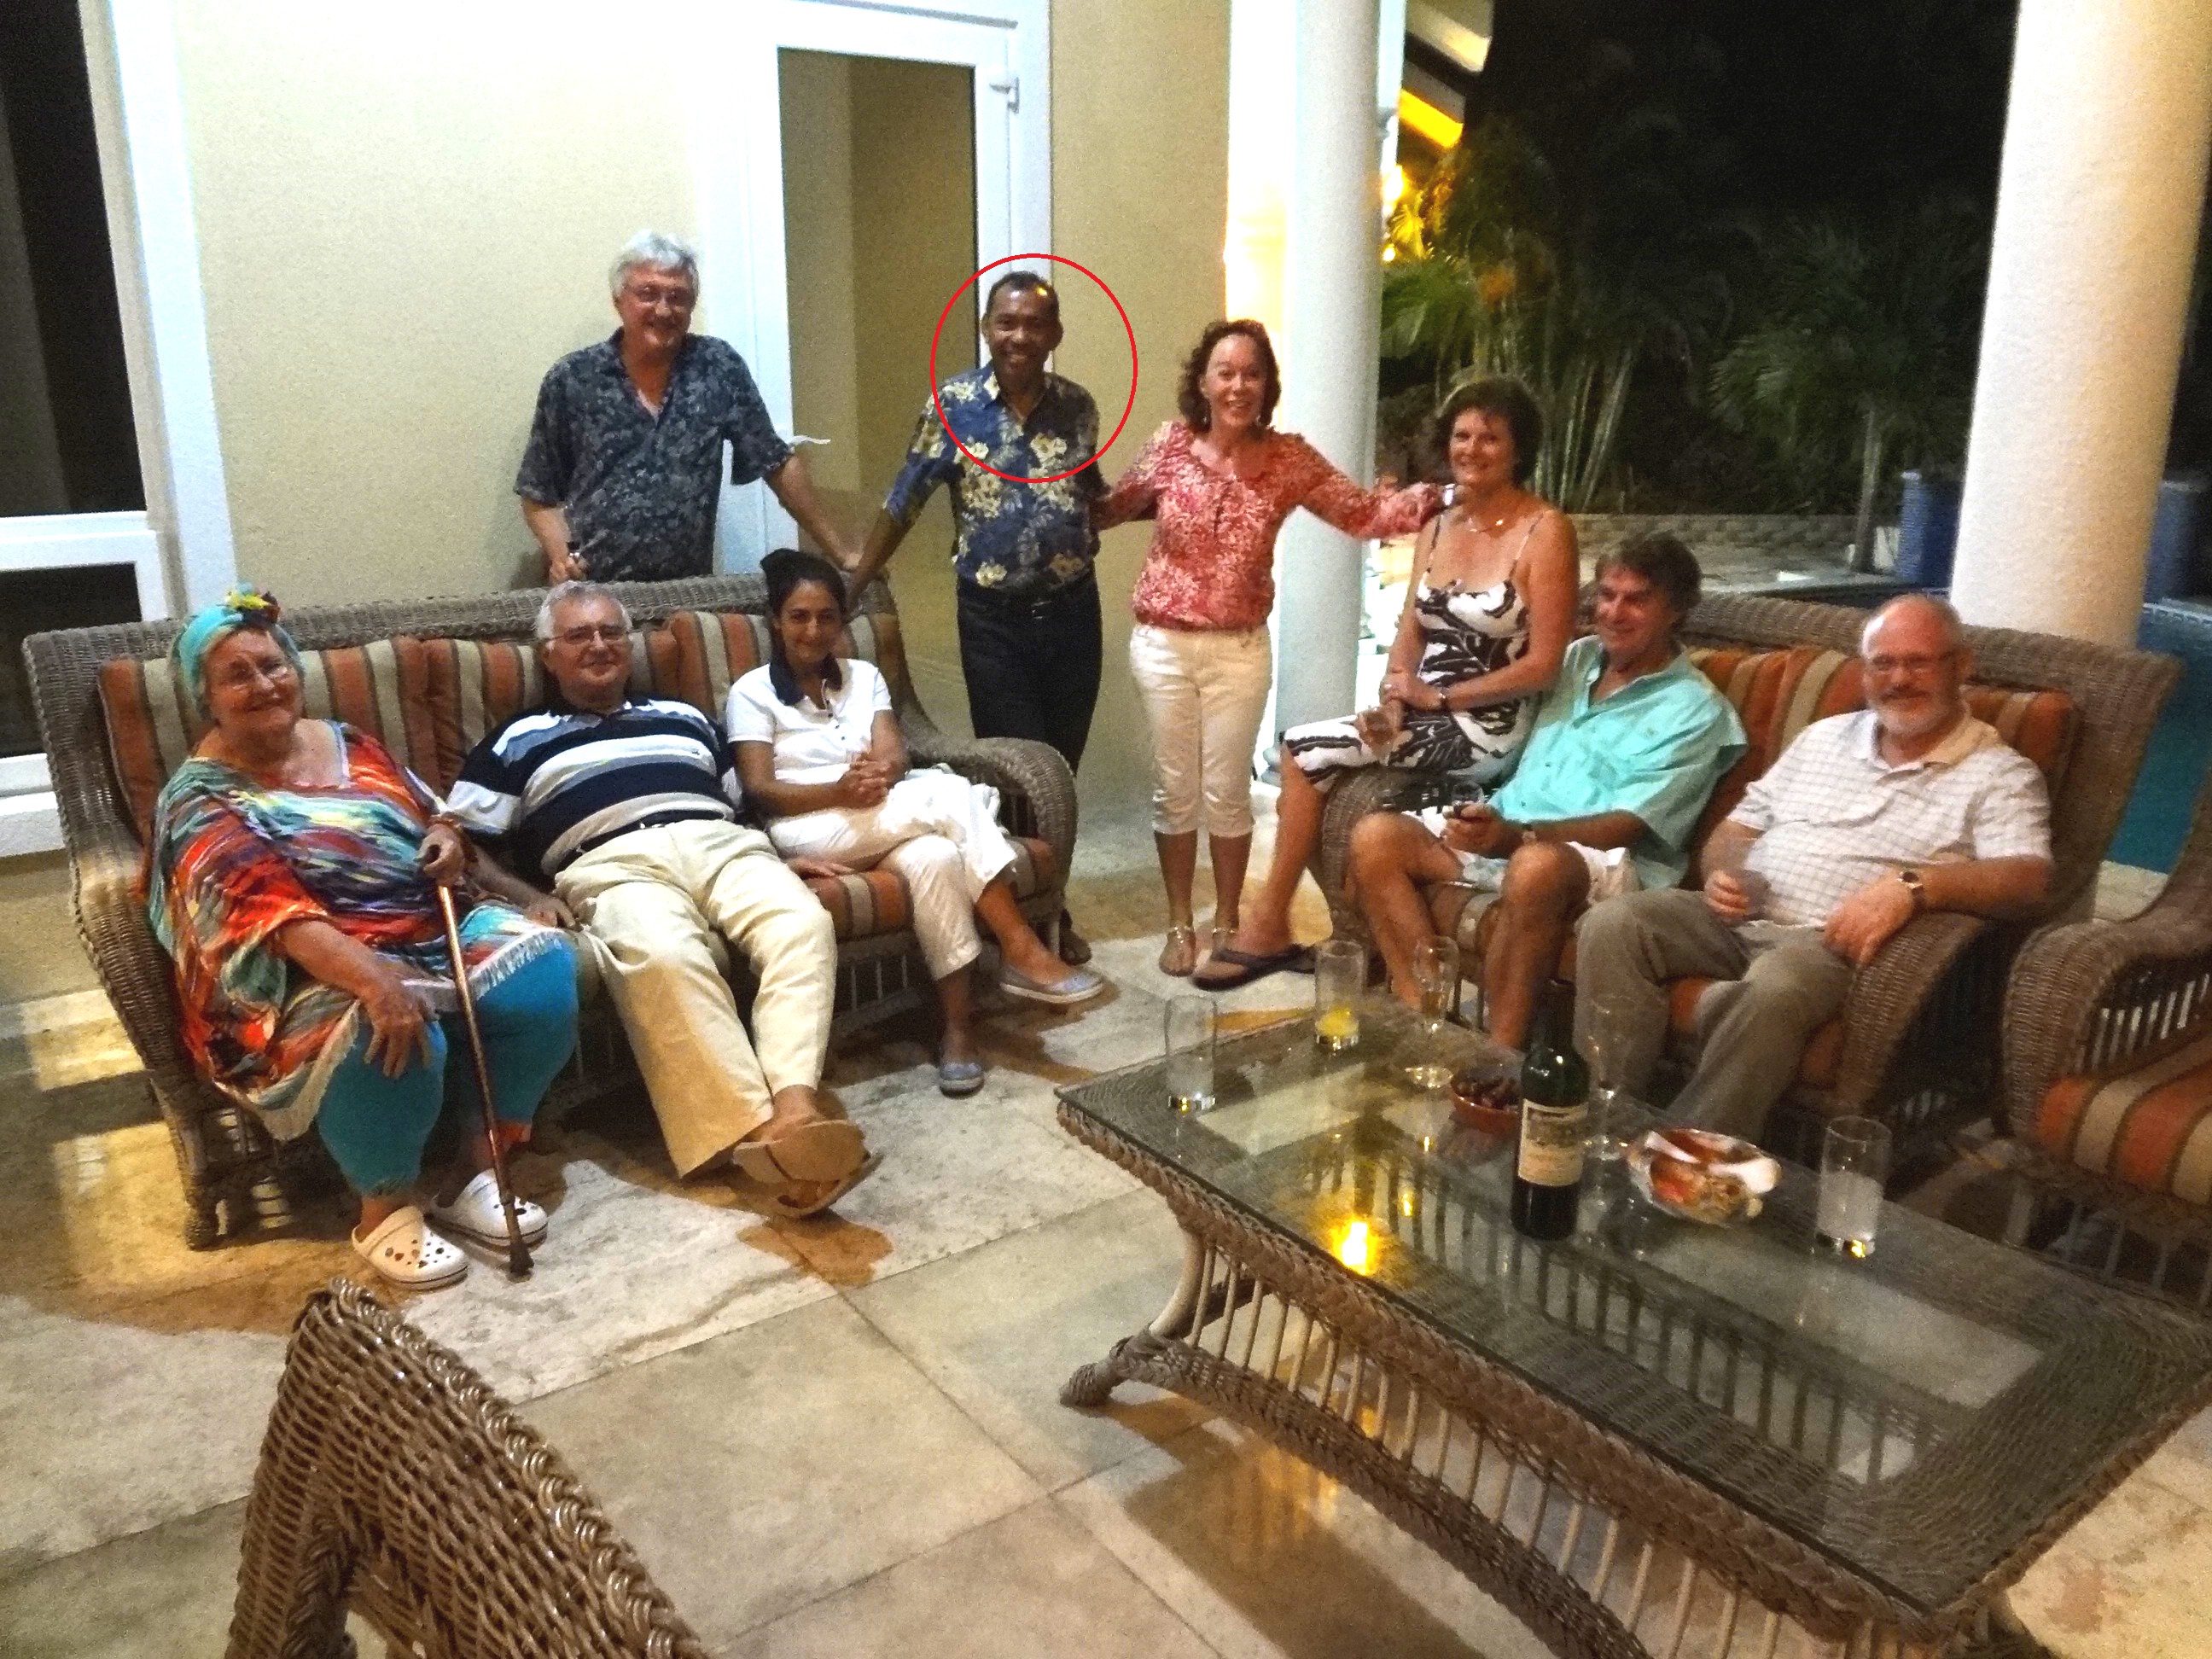 A very relaxed John Dalli, then still a European Commissioner, lies on a sofa in the Bahamas between two fraudsters, Mary Swan aka Lady Bird on the left and Mel Tari standing right, ringed in red. HIs daughter Louisa Dalli, wearing white, is seated near him.